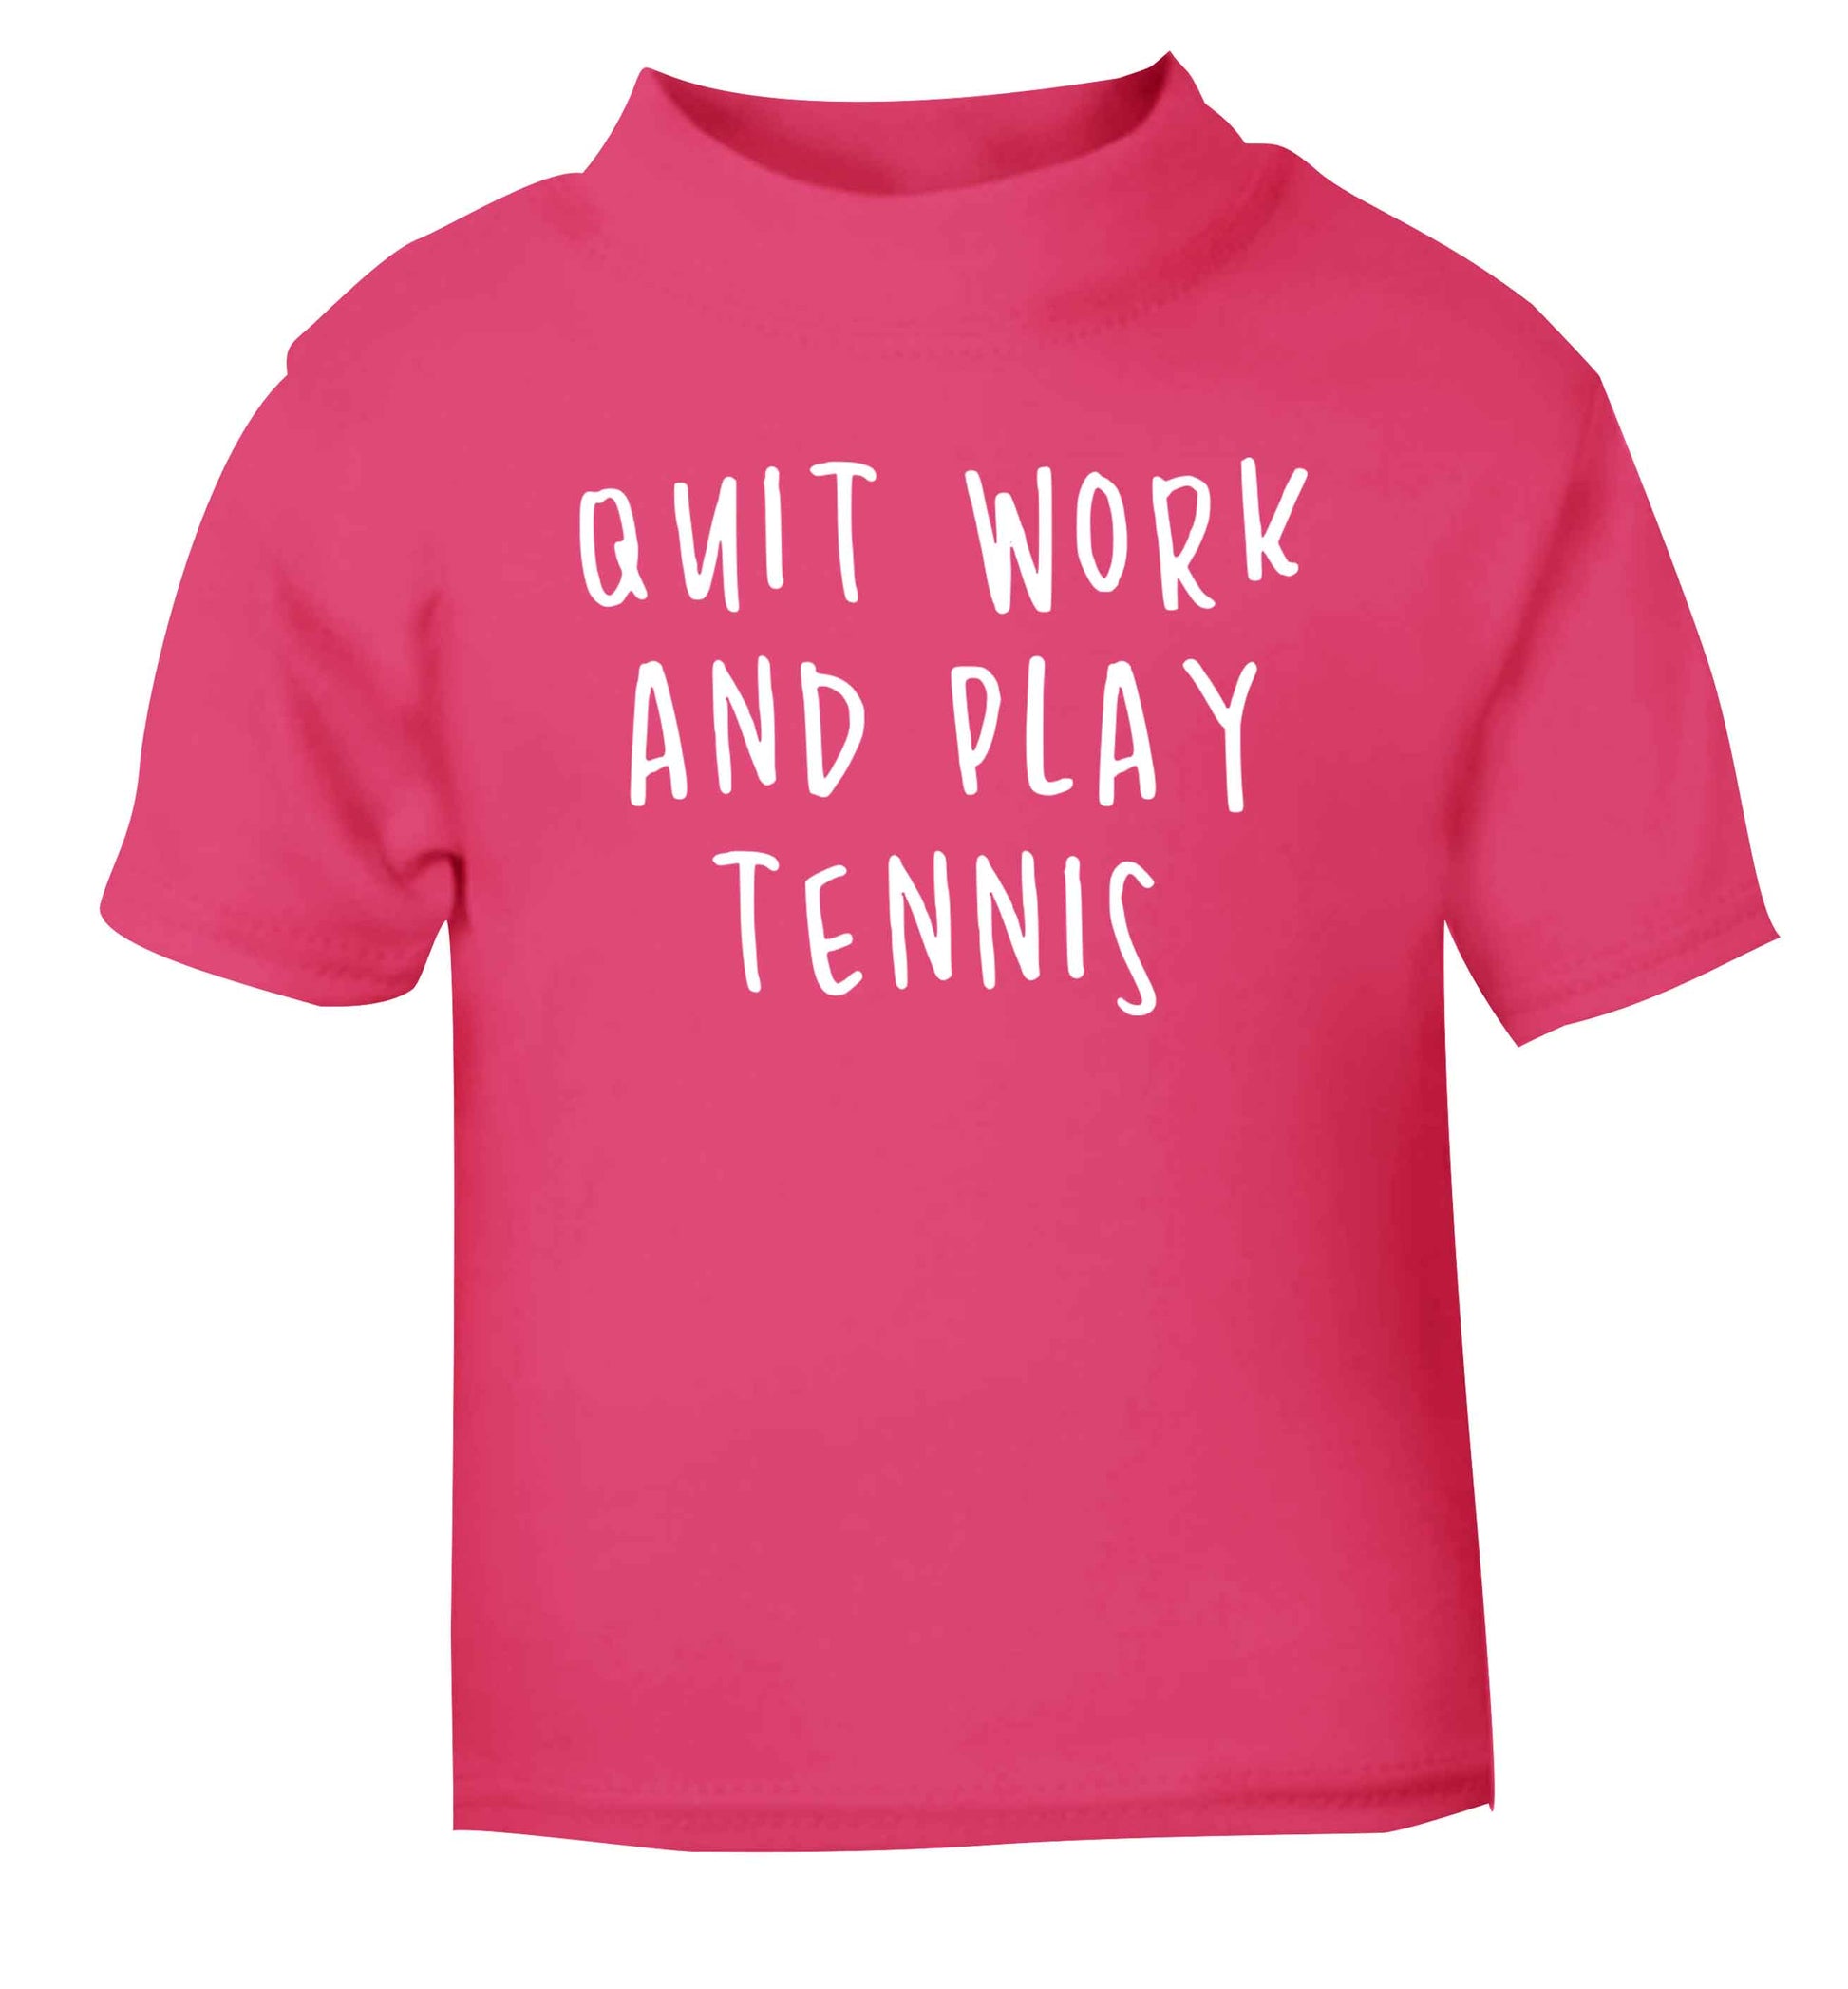 Quit work and play tennis pink Baby Toddler Tshirt 2 Years